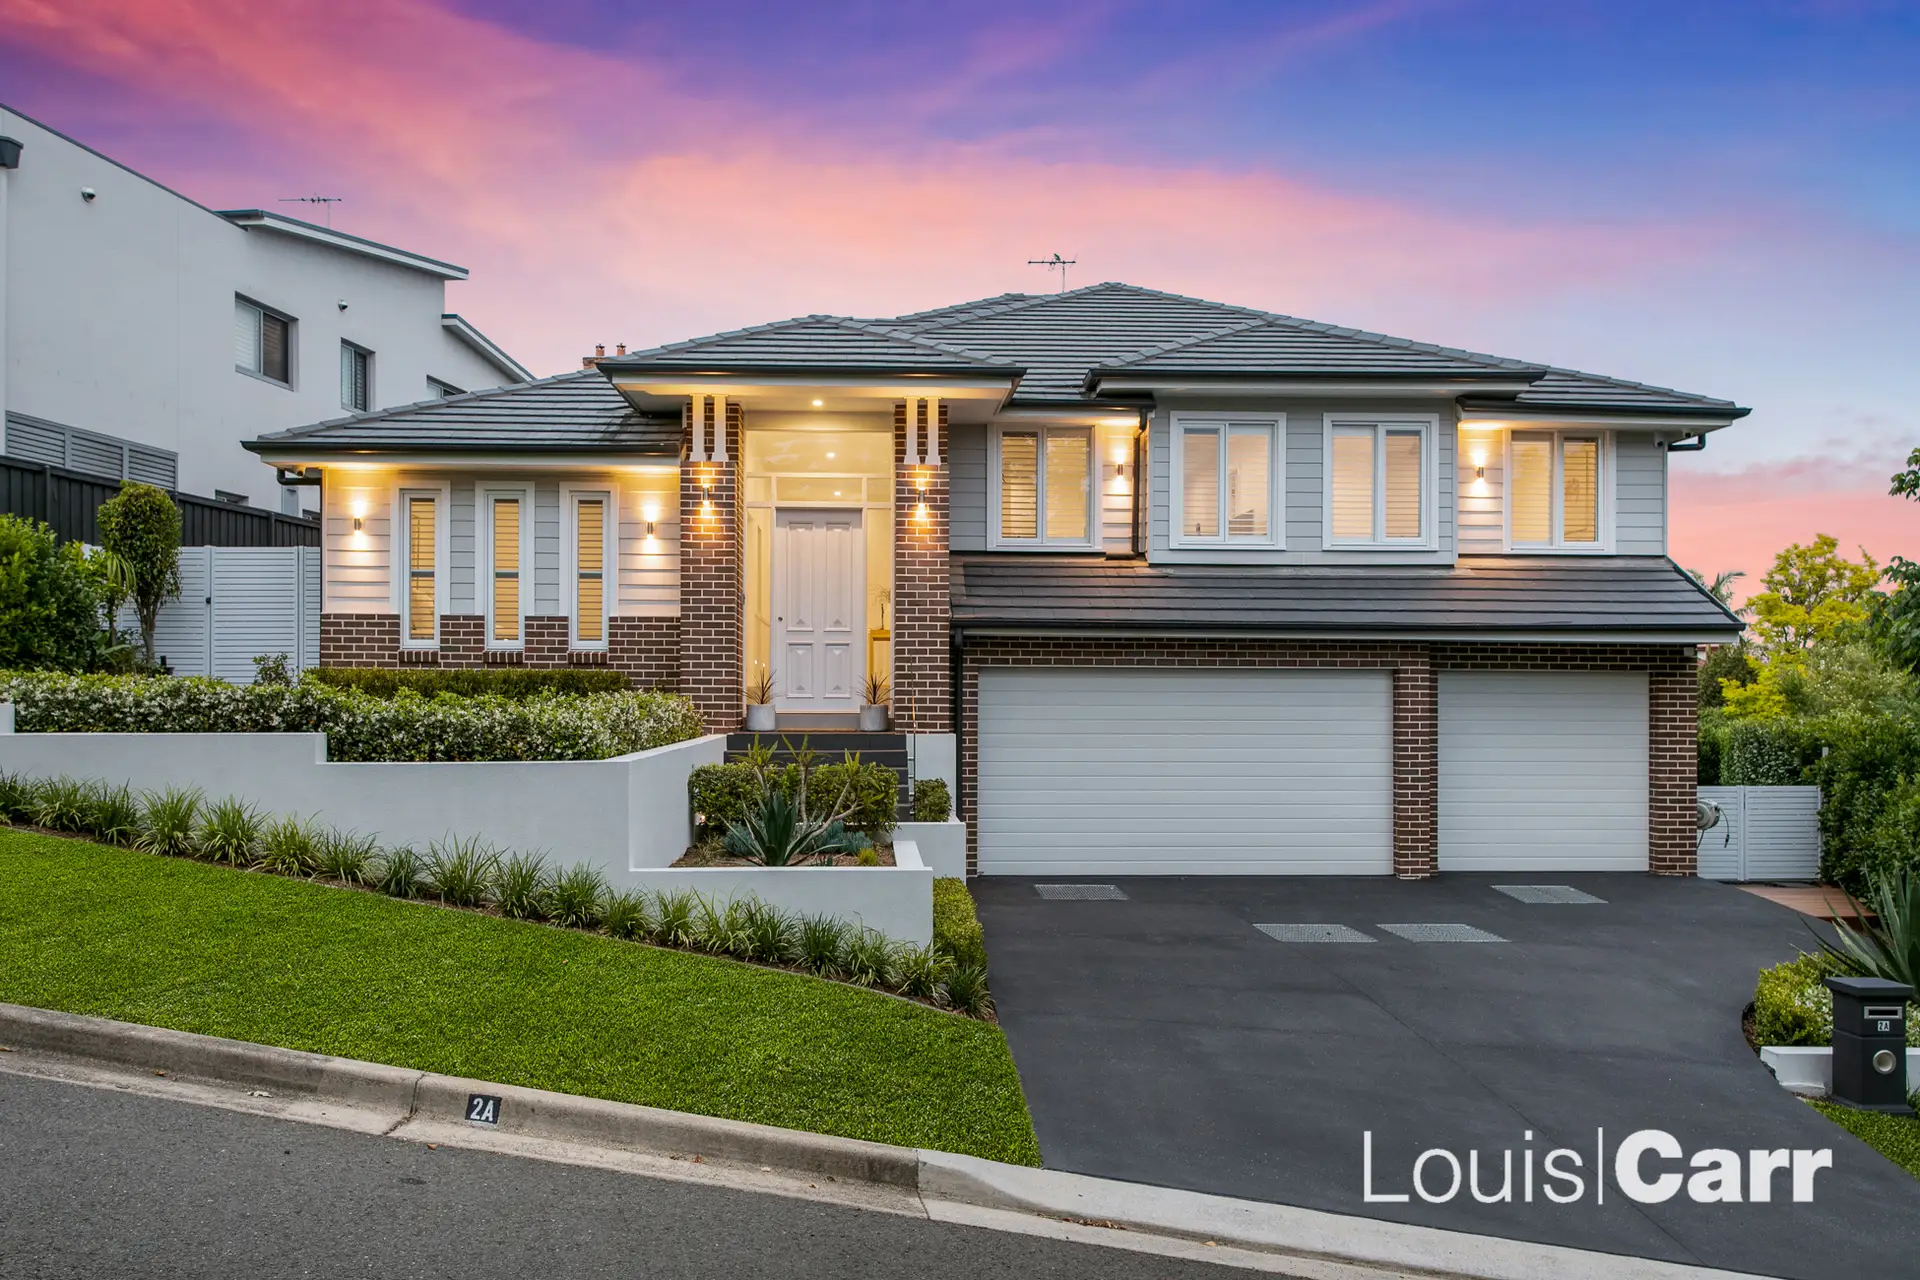 Photo #1: 2a Salisbury Downs Drive, West Pennant Hills - Sold by Louis Carr Real Estate